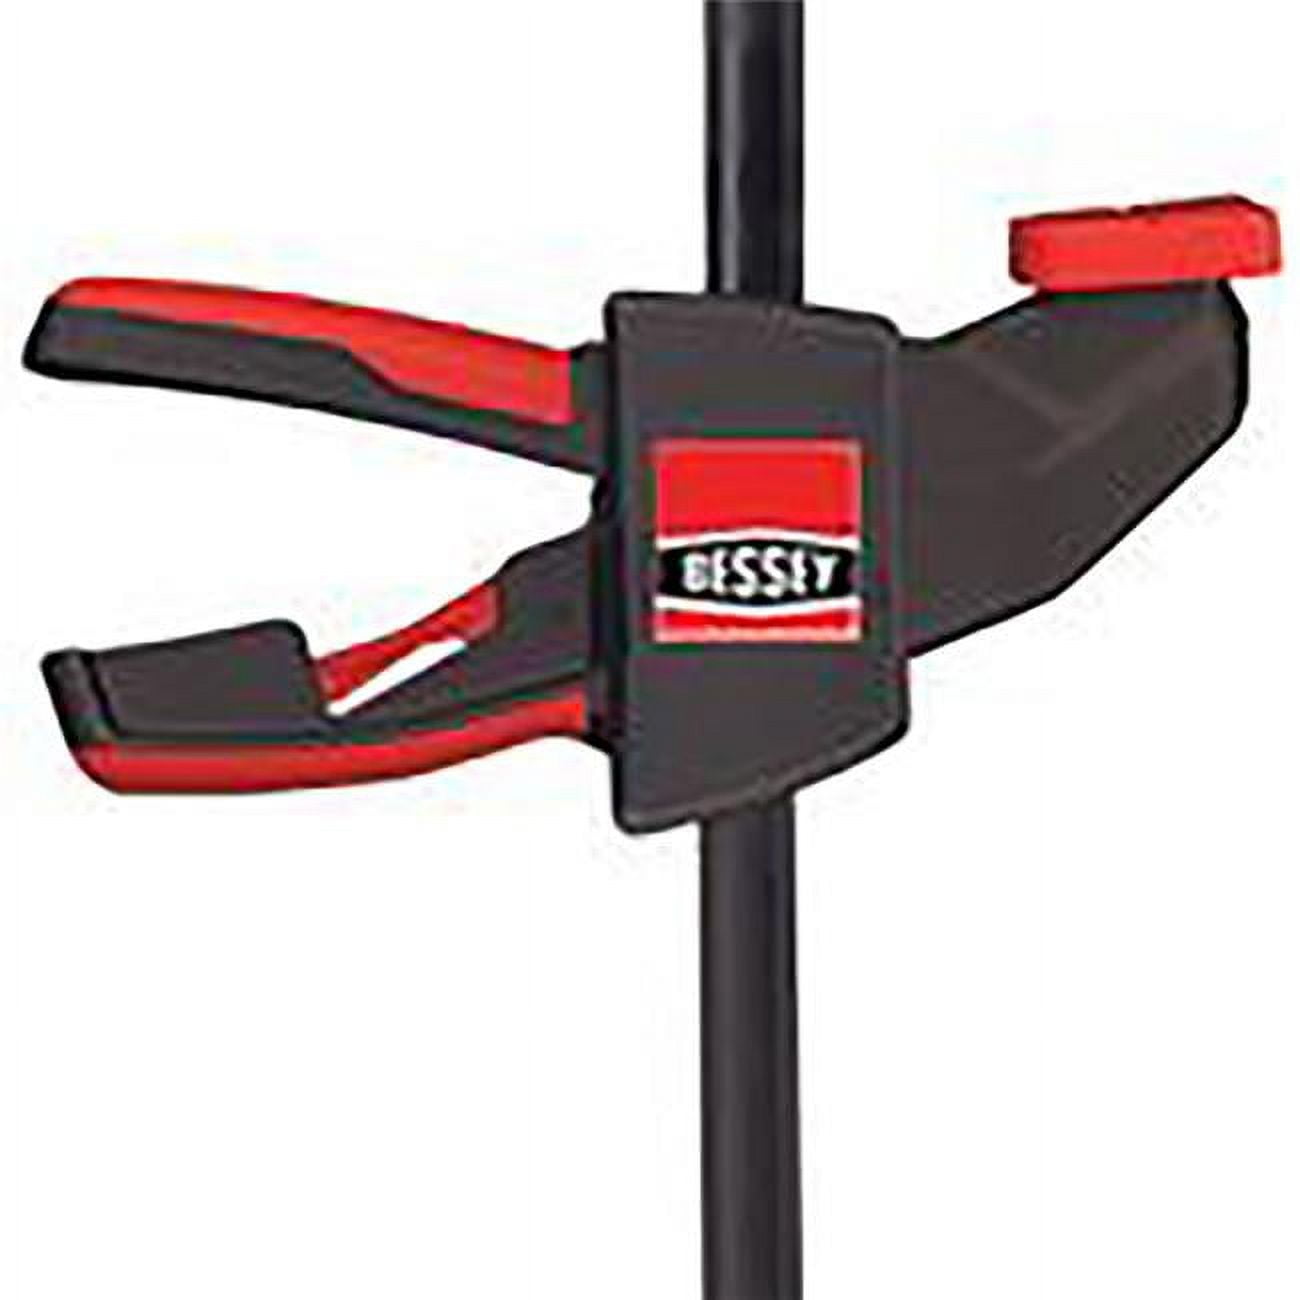 Picture of Bessey 2007082 24 x 3.125 in. 300 lbs EHK Trigger Clamp